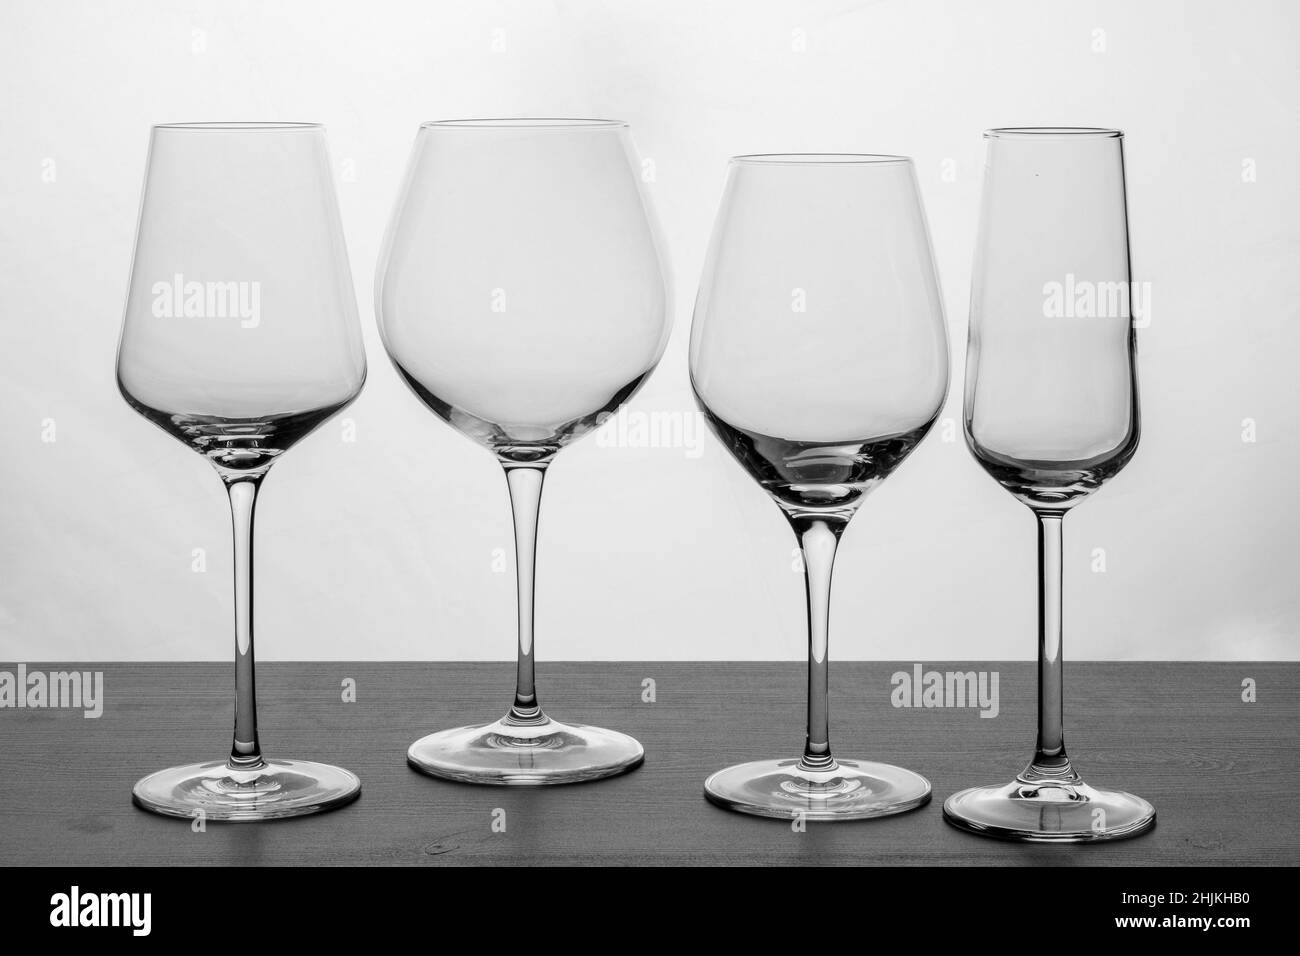 A set of various wine and champagne glasses in black and white Stock Photo